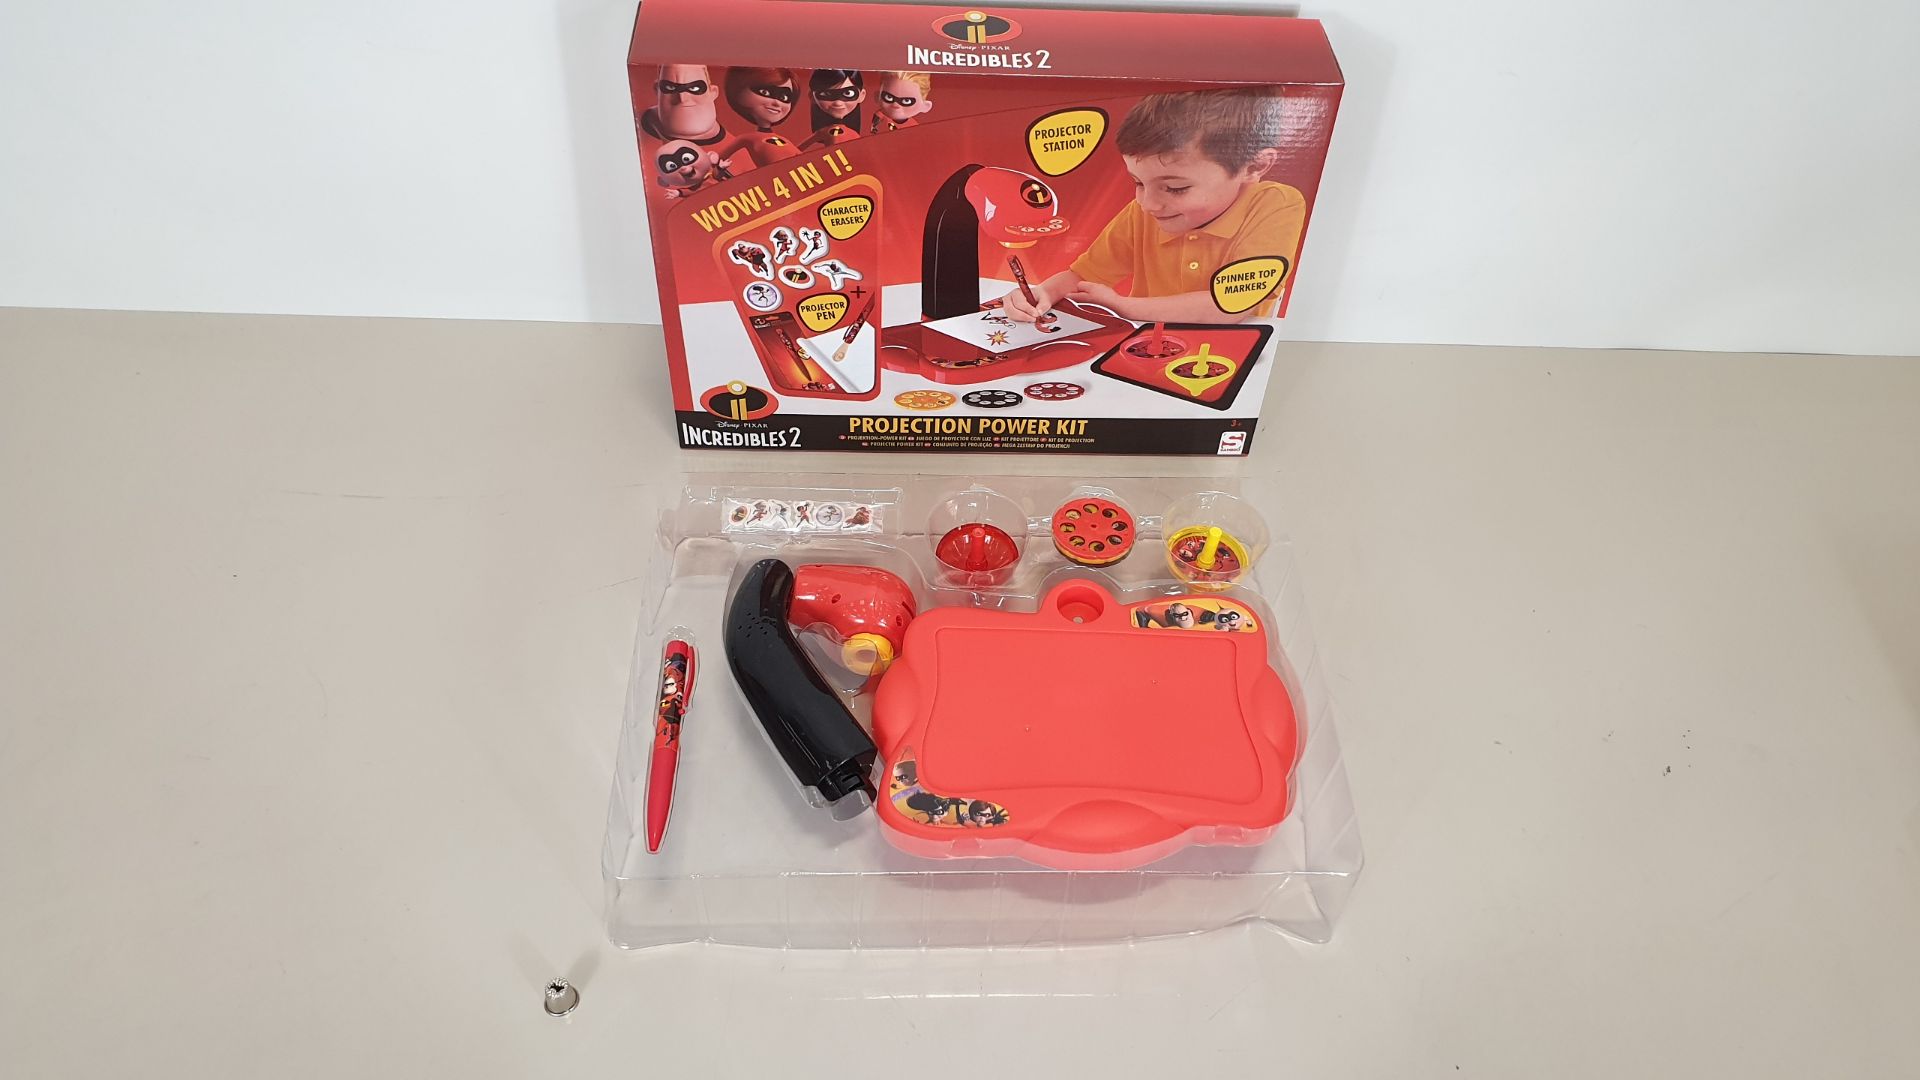 60 X BRAND NEW DISNEY PIXAR INCREDIBLES 2 WOW 4 IN 1 PROJECTION POWER KIT, INCLUDES PROJECTION